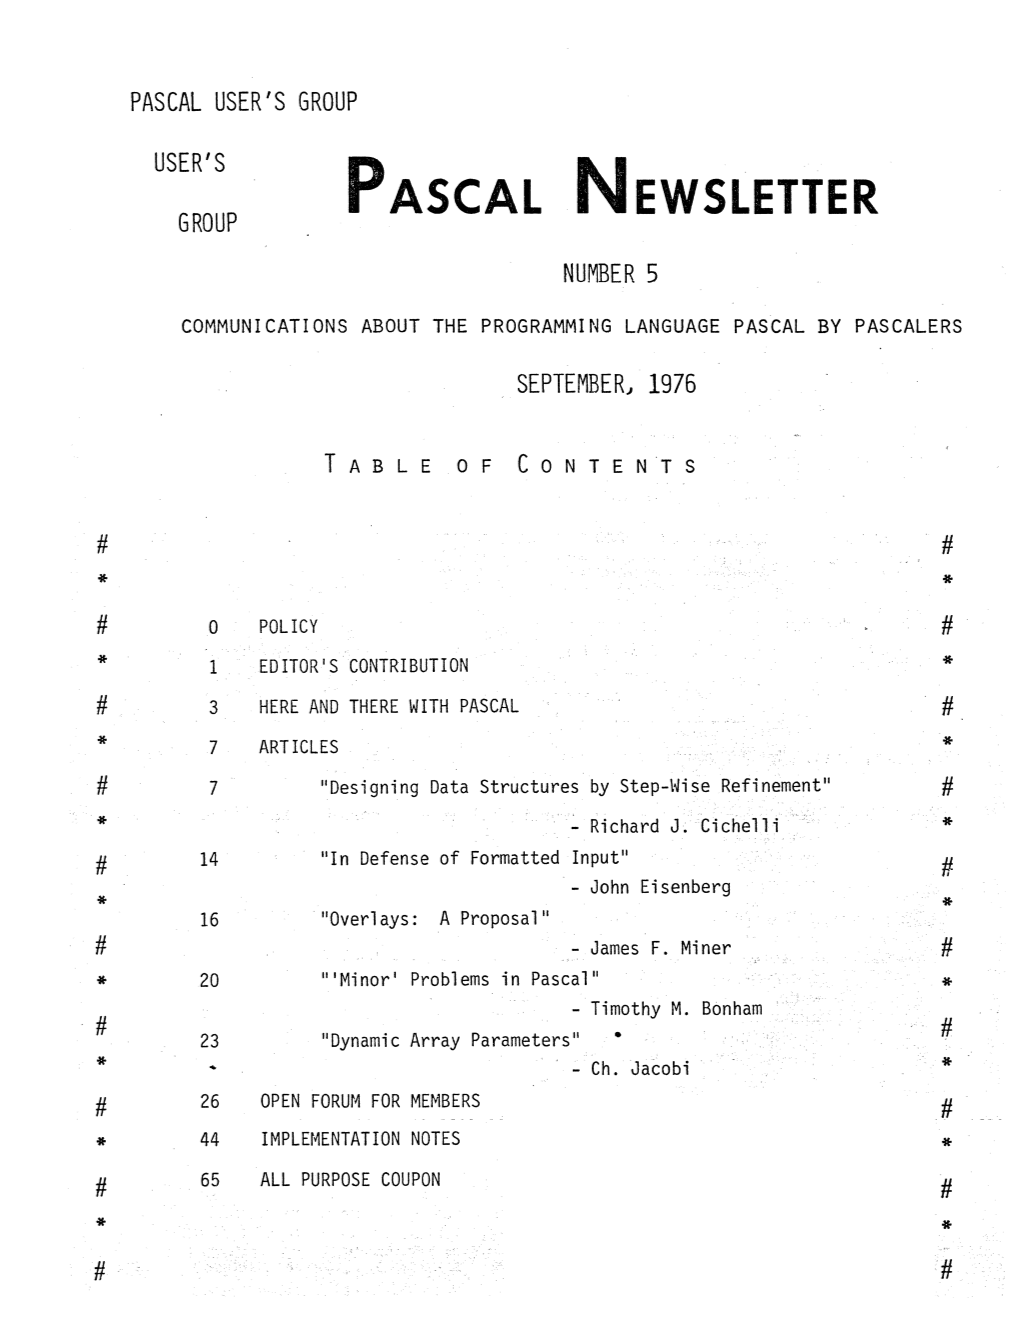 Pascal Newsletter Number 5